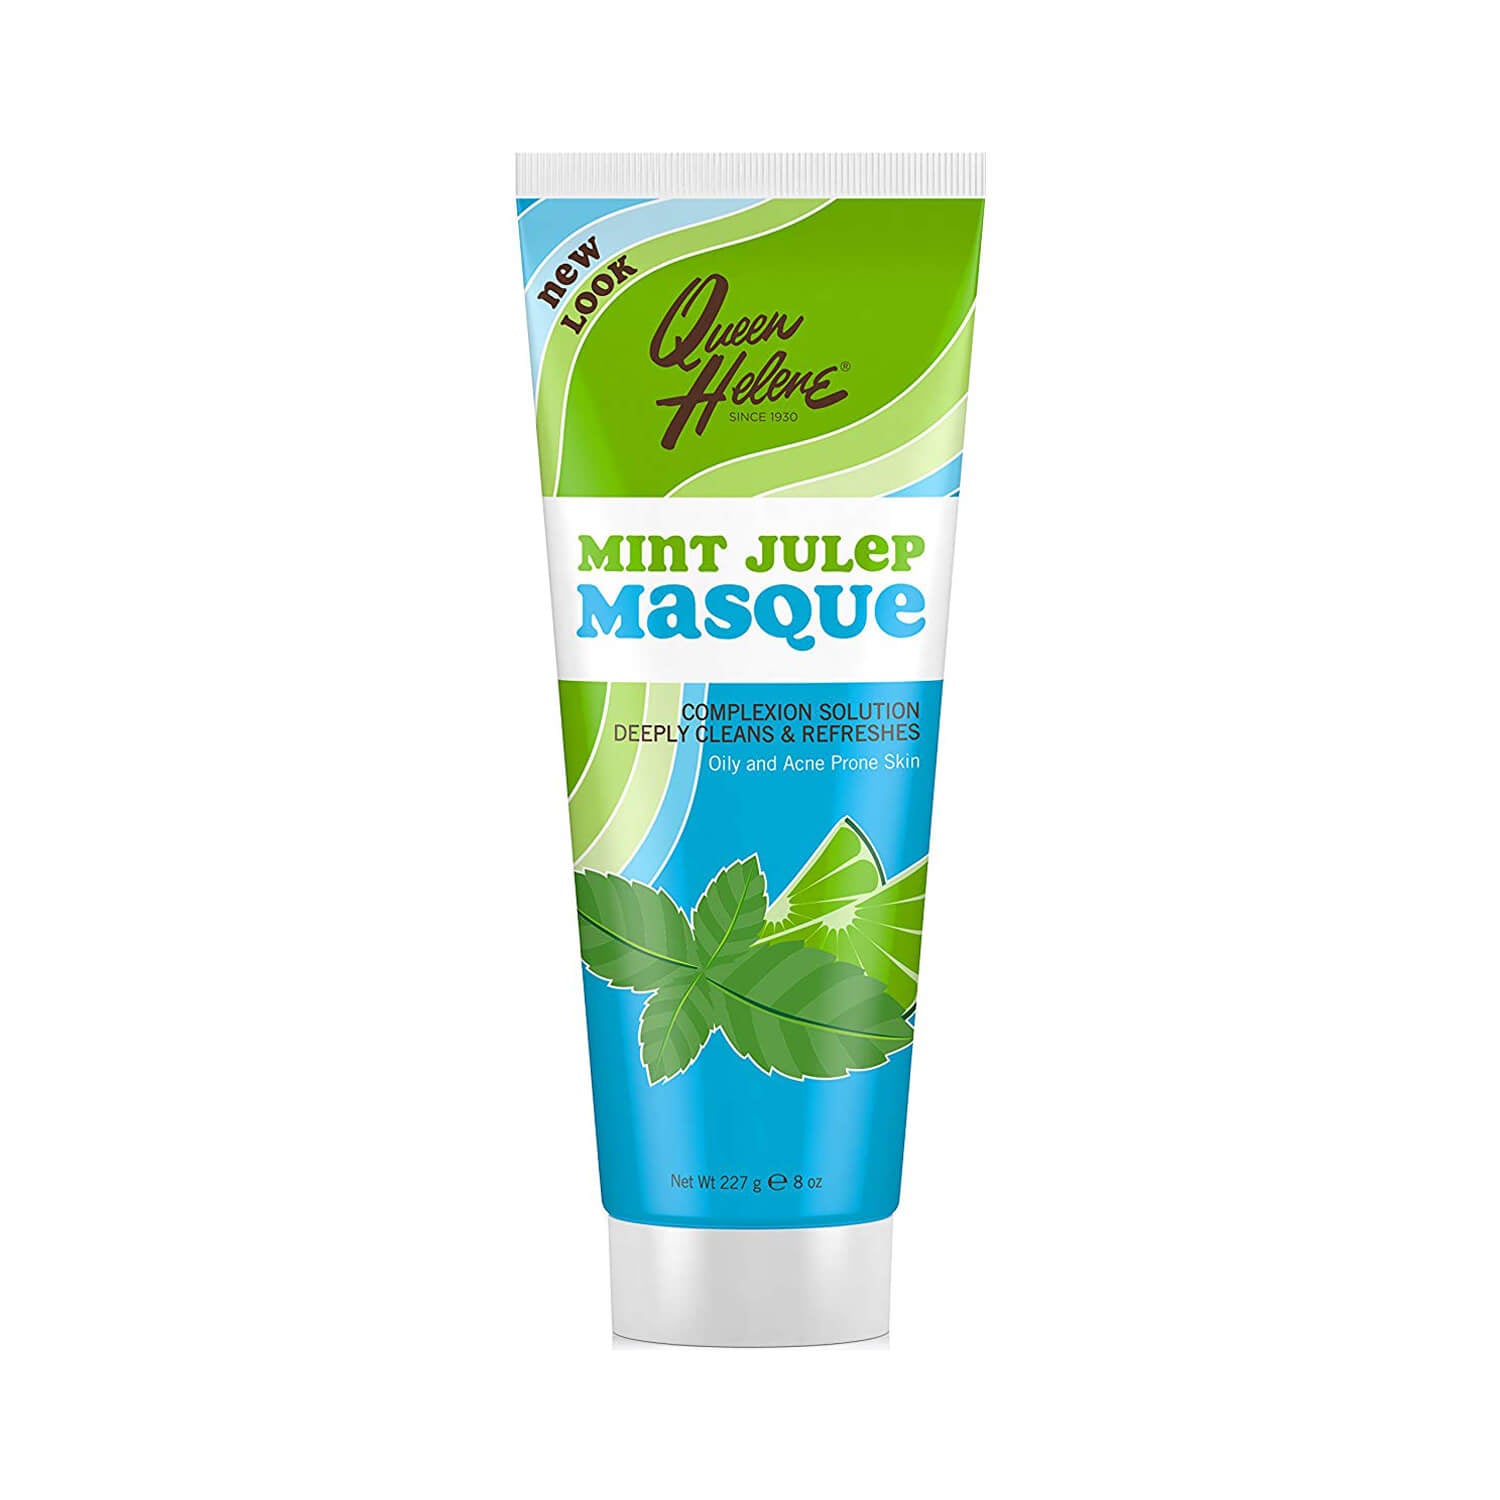 Queen Helene Mint Julep Masque Oily and Acne Prone Skin 227g